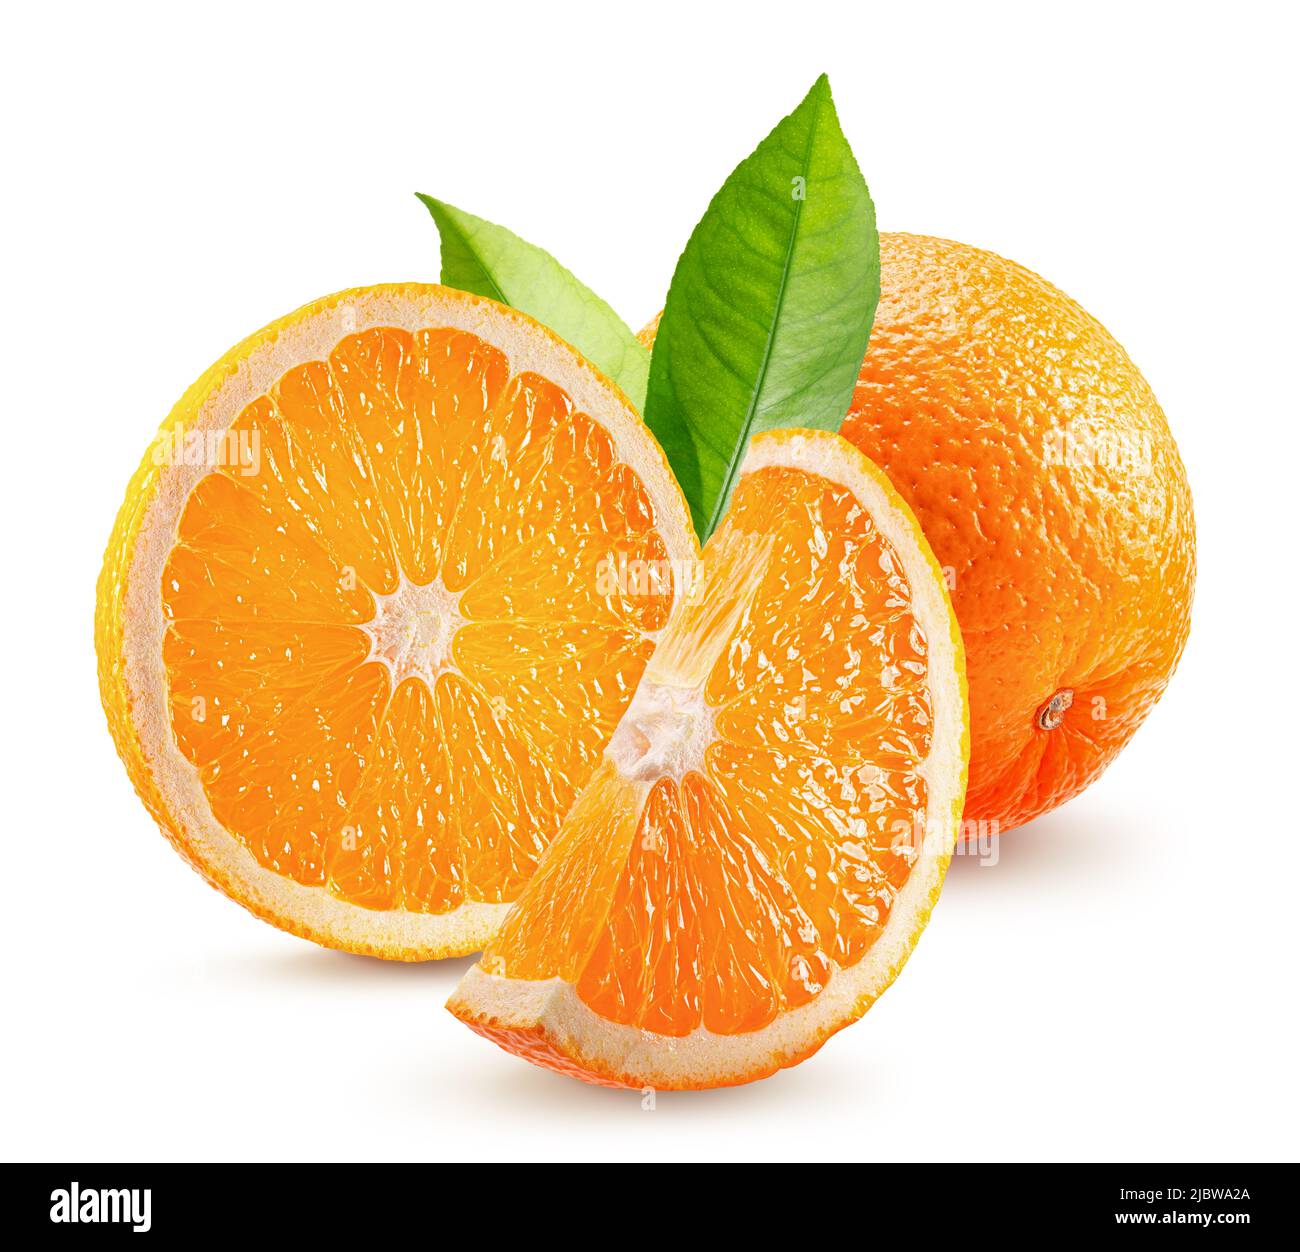 oranges with leaves isolated on a white background. Stock Photo